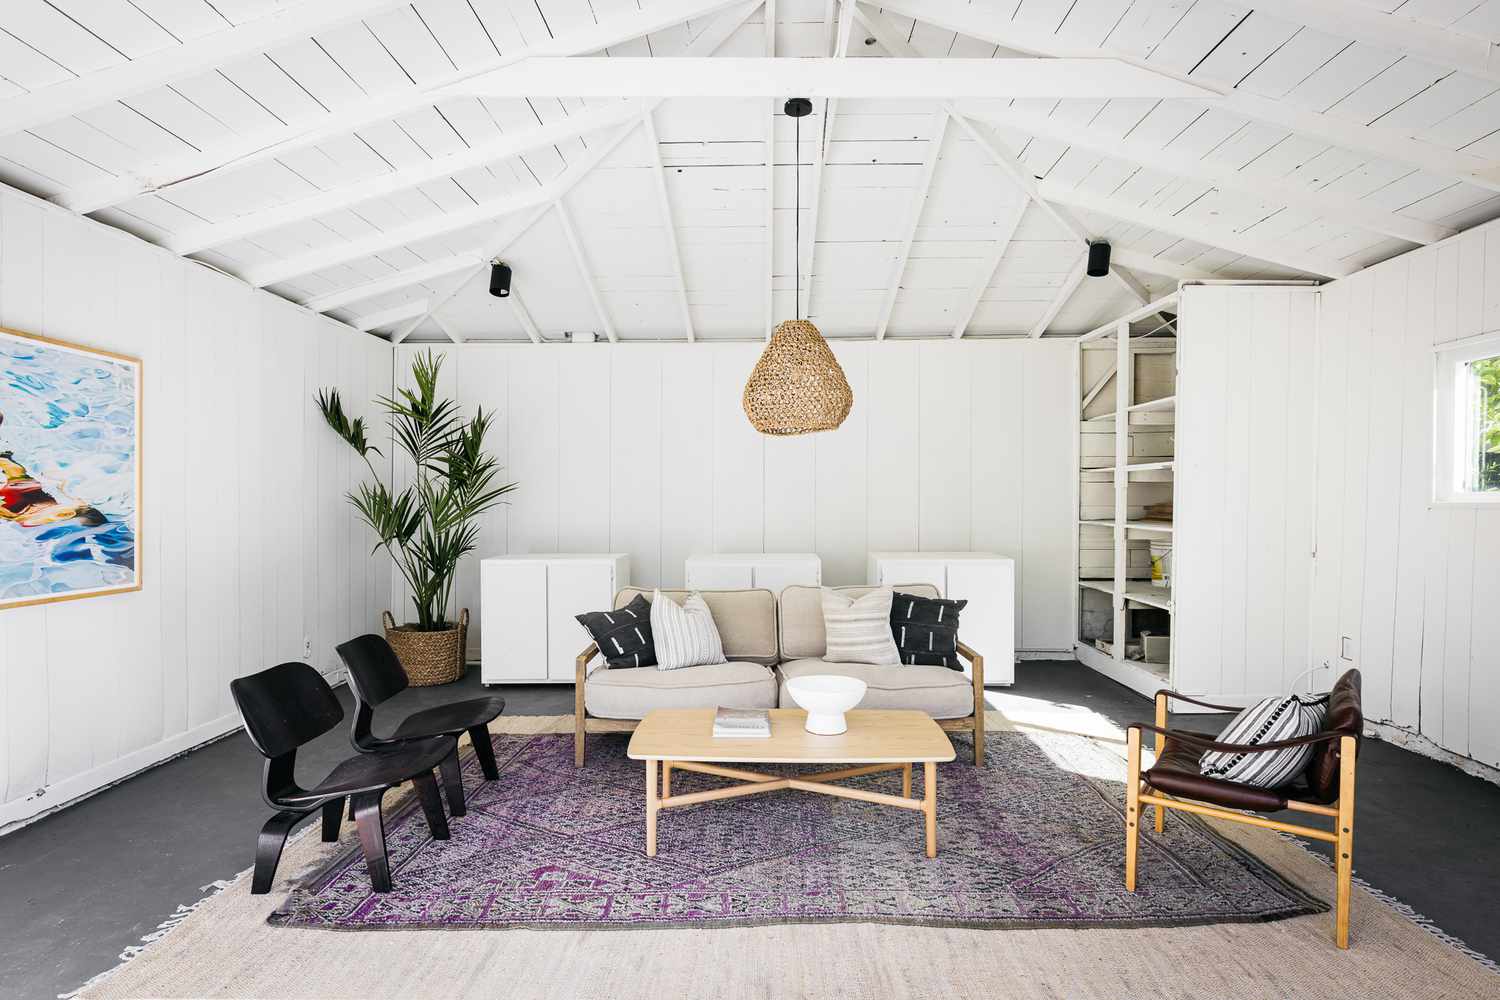 Interior of she-shed with seating on top of purple patterned area rug